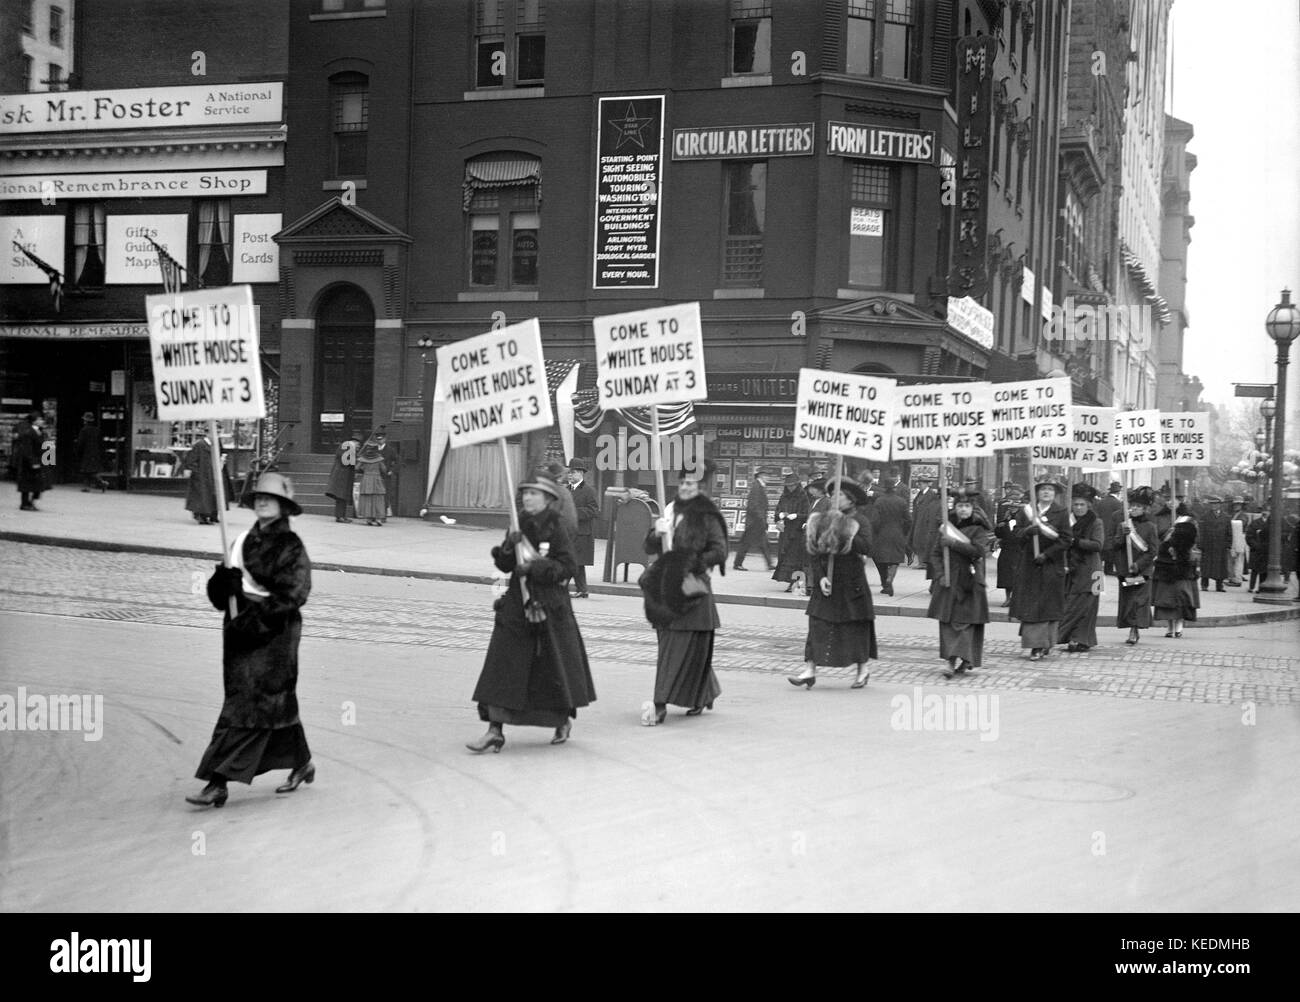 Women's Suffrage March with Signs inviting People to Protest at White House, Washington DC, USA, Harris & Ewing, 1917 Stock Photo